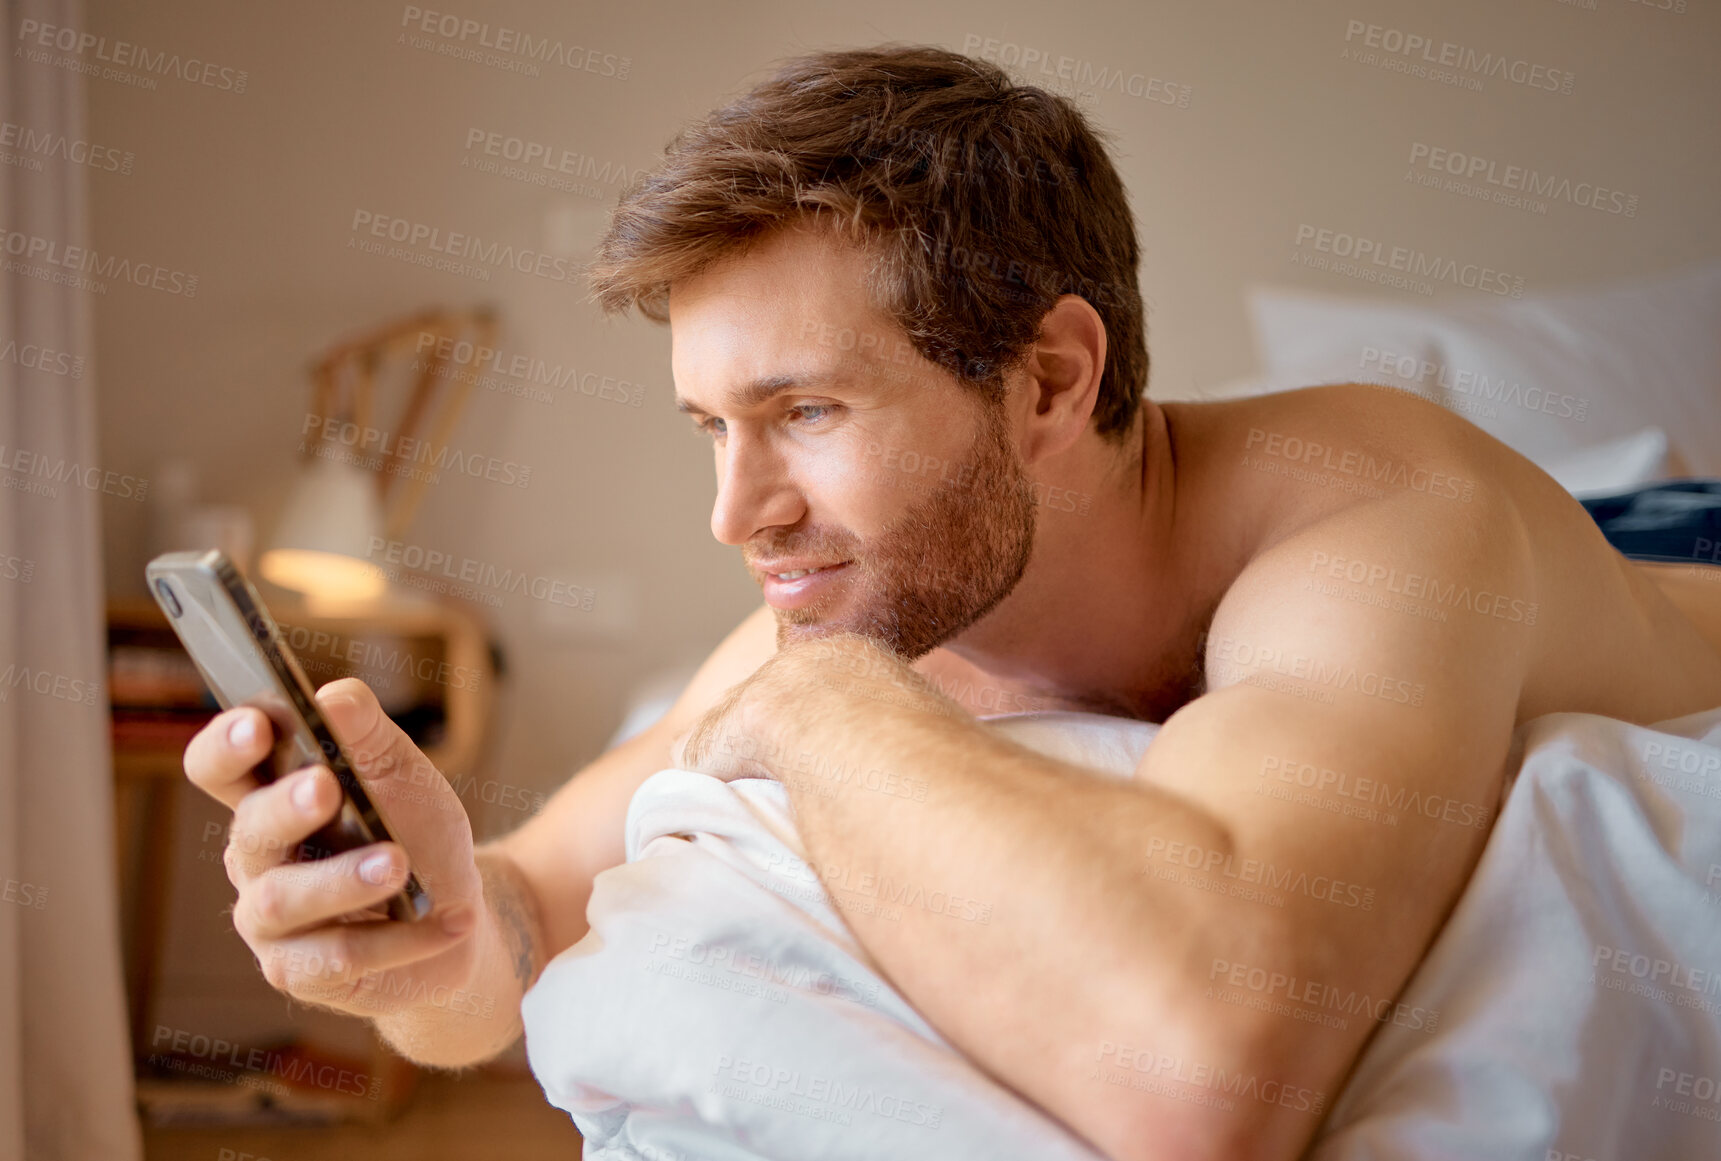 Buy stock photo Phone web dating app search, internet streaming or texting of an attractive man in a bedroom bed. Digital, online and social media on a 5g mobile while a guy relax at a house with technology